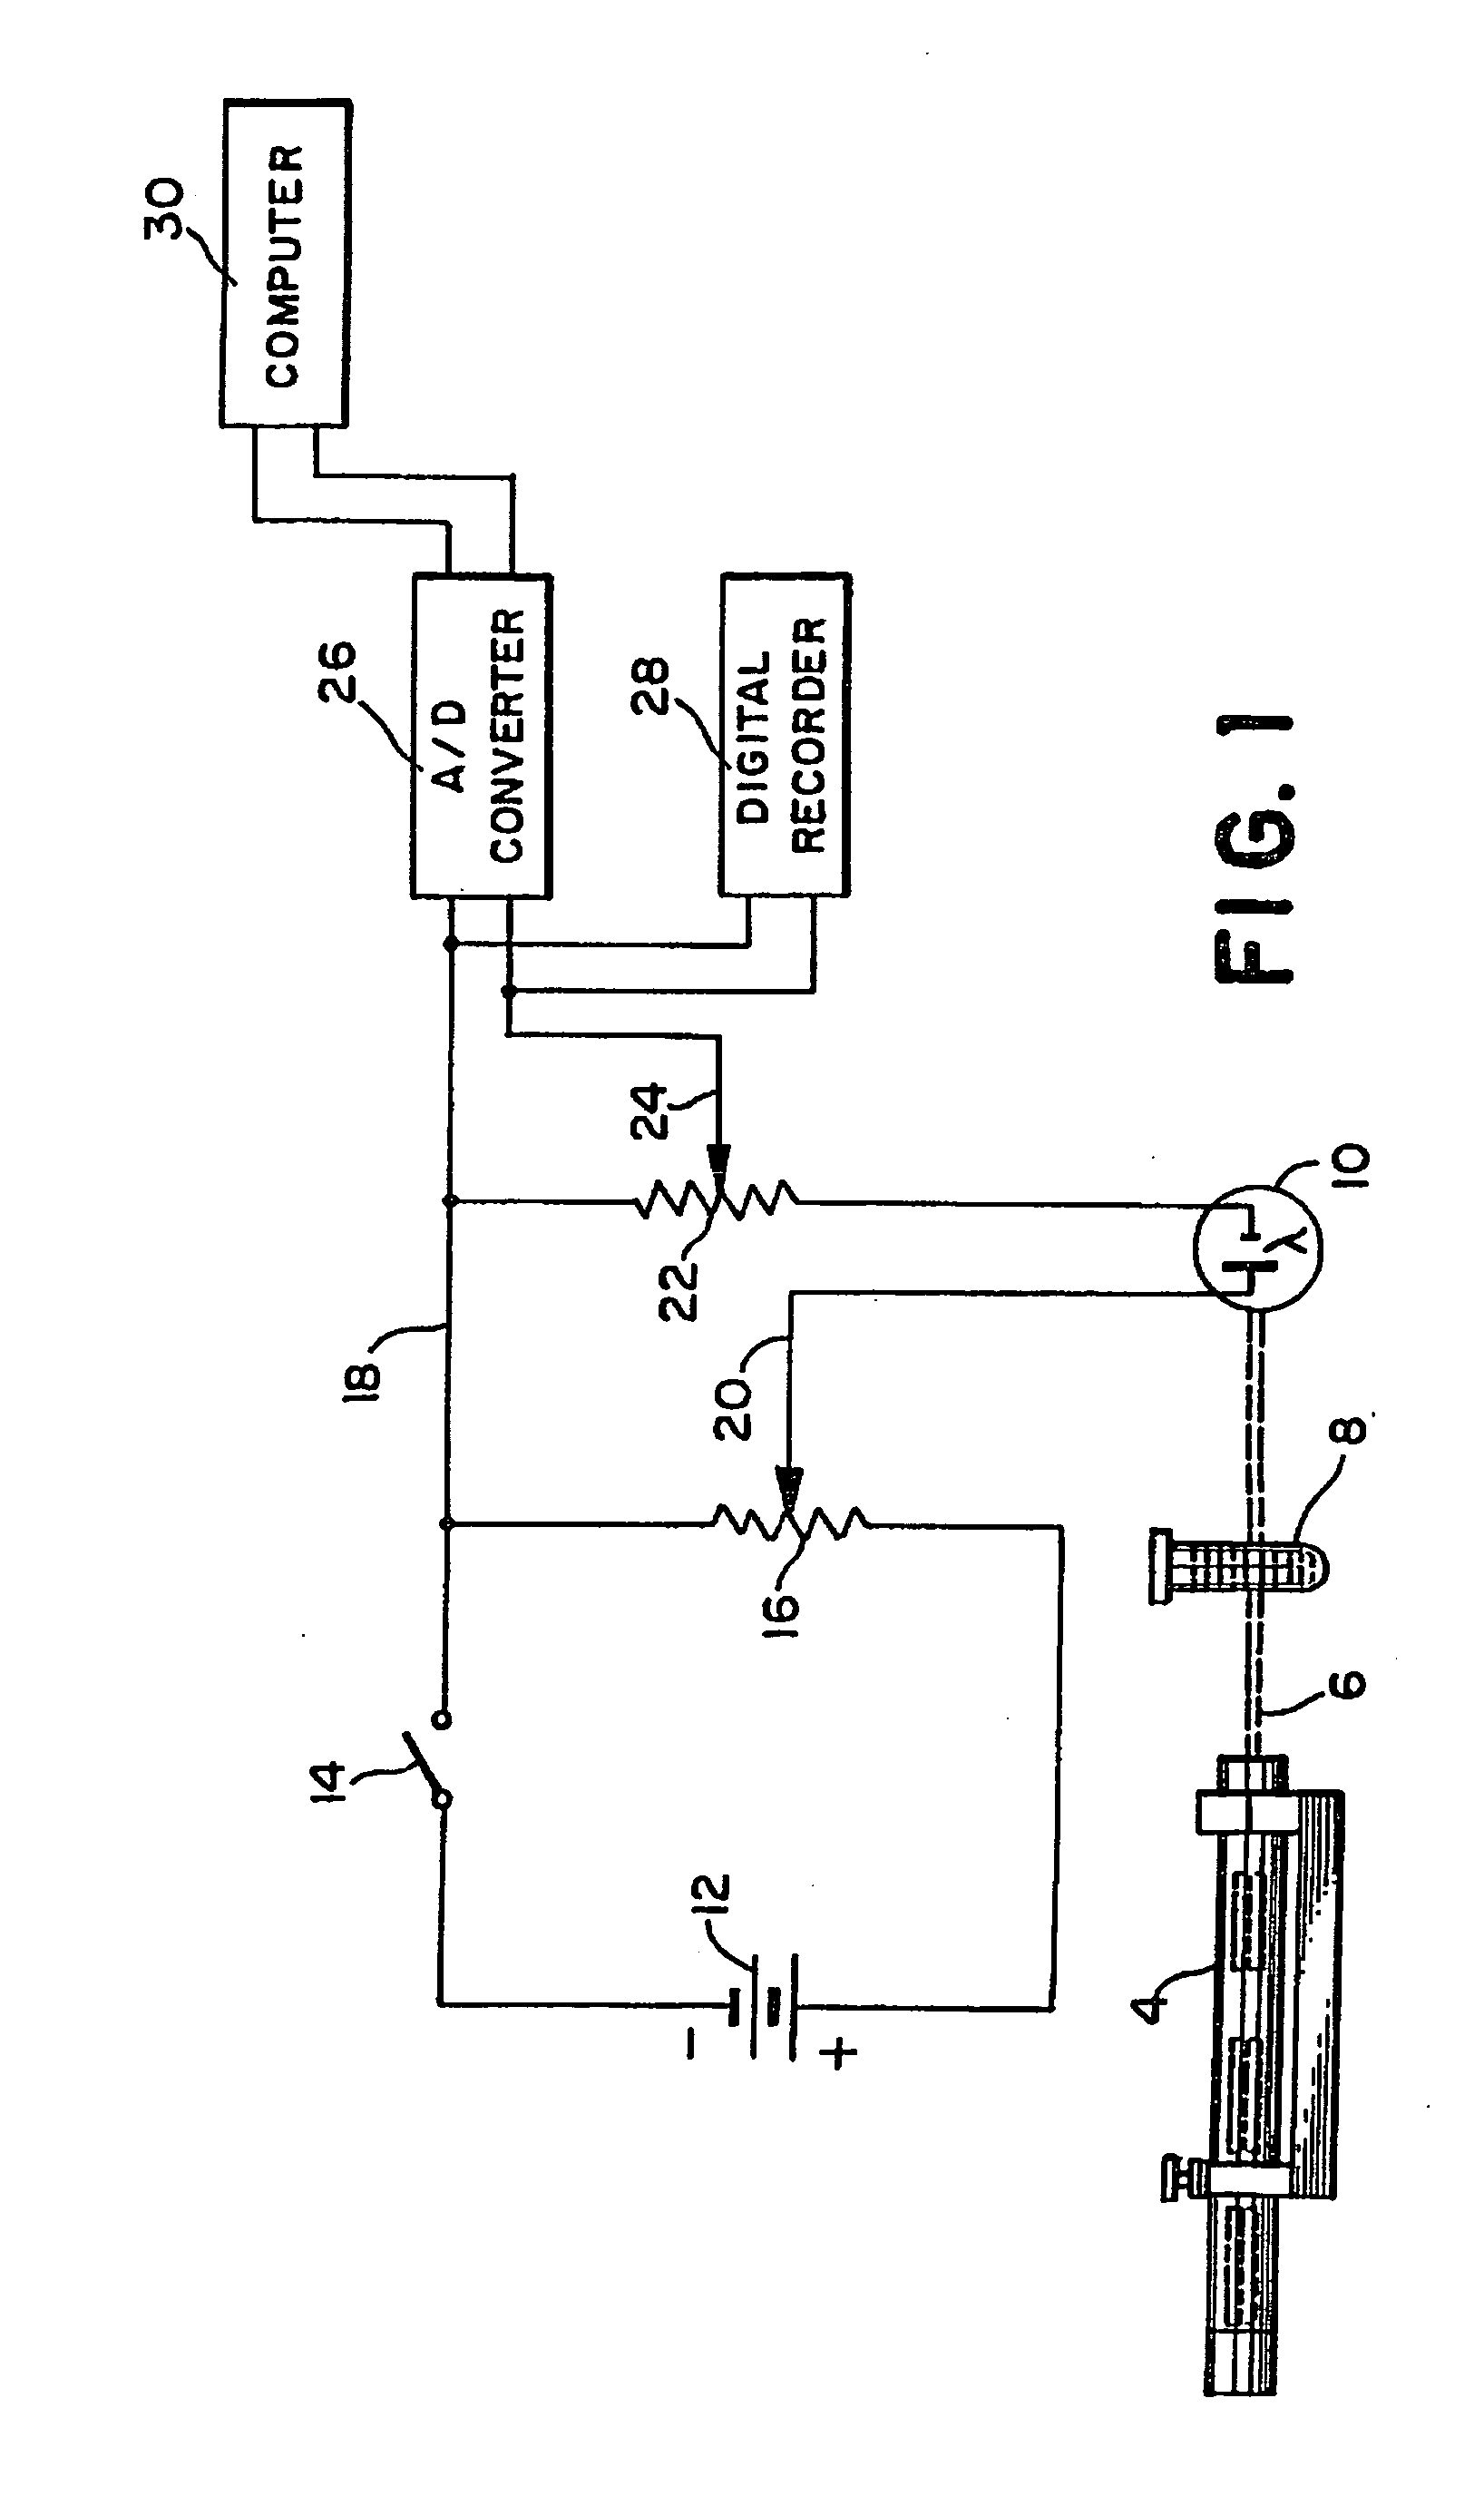 Method and apparatus for evaluating prothrombotic conditions